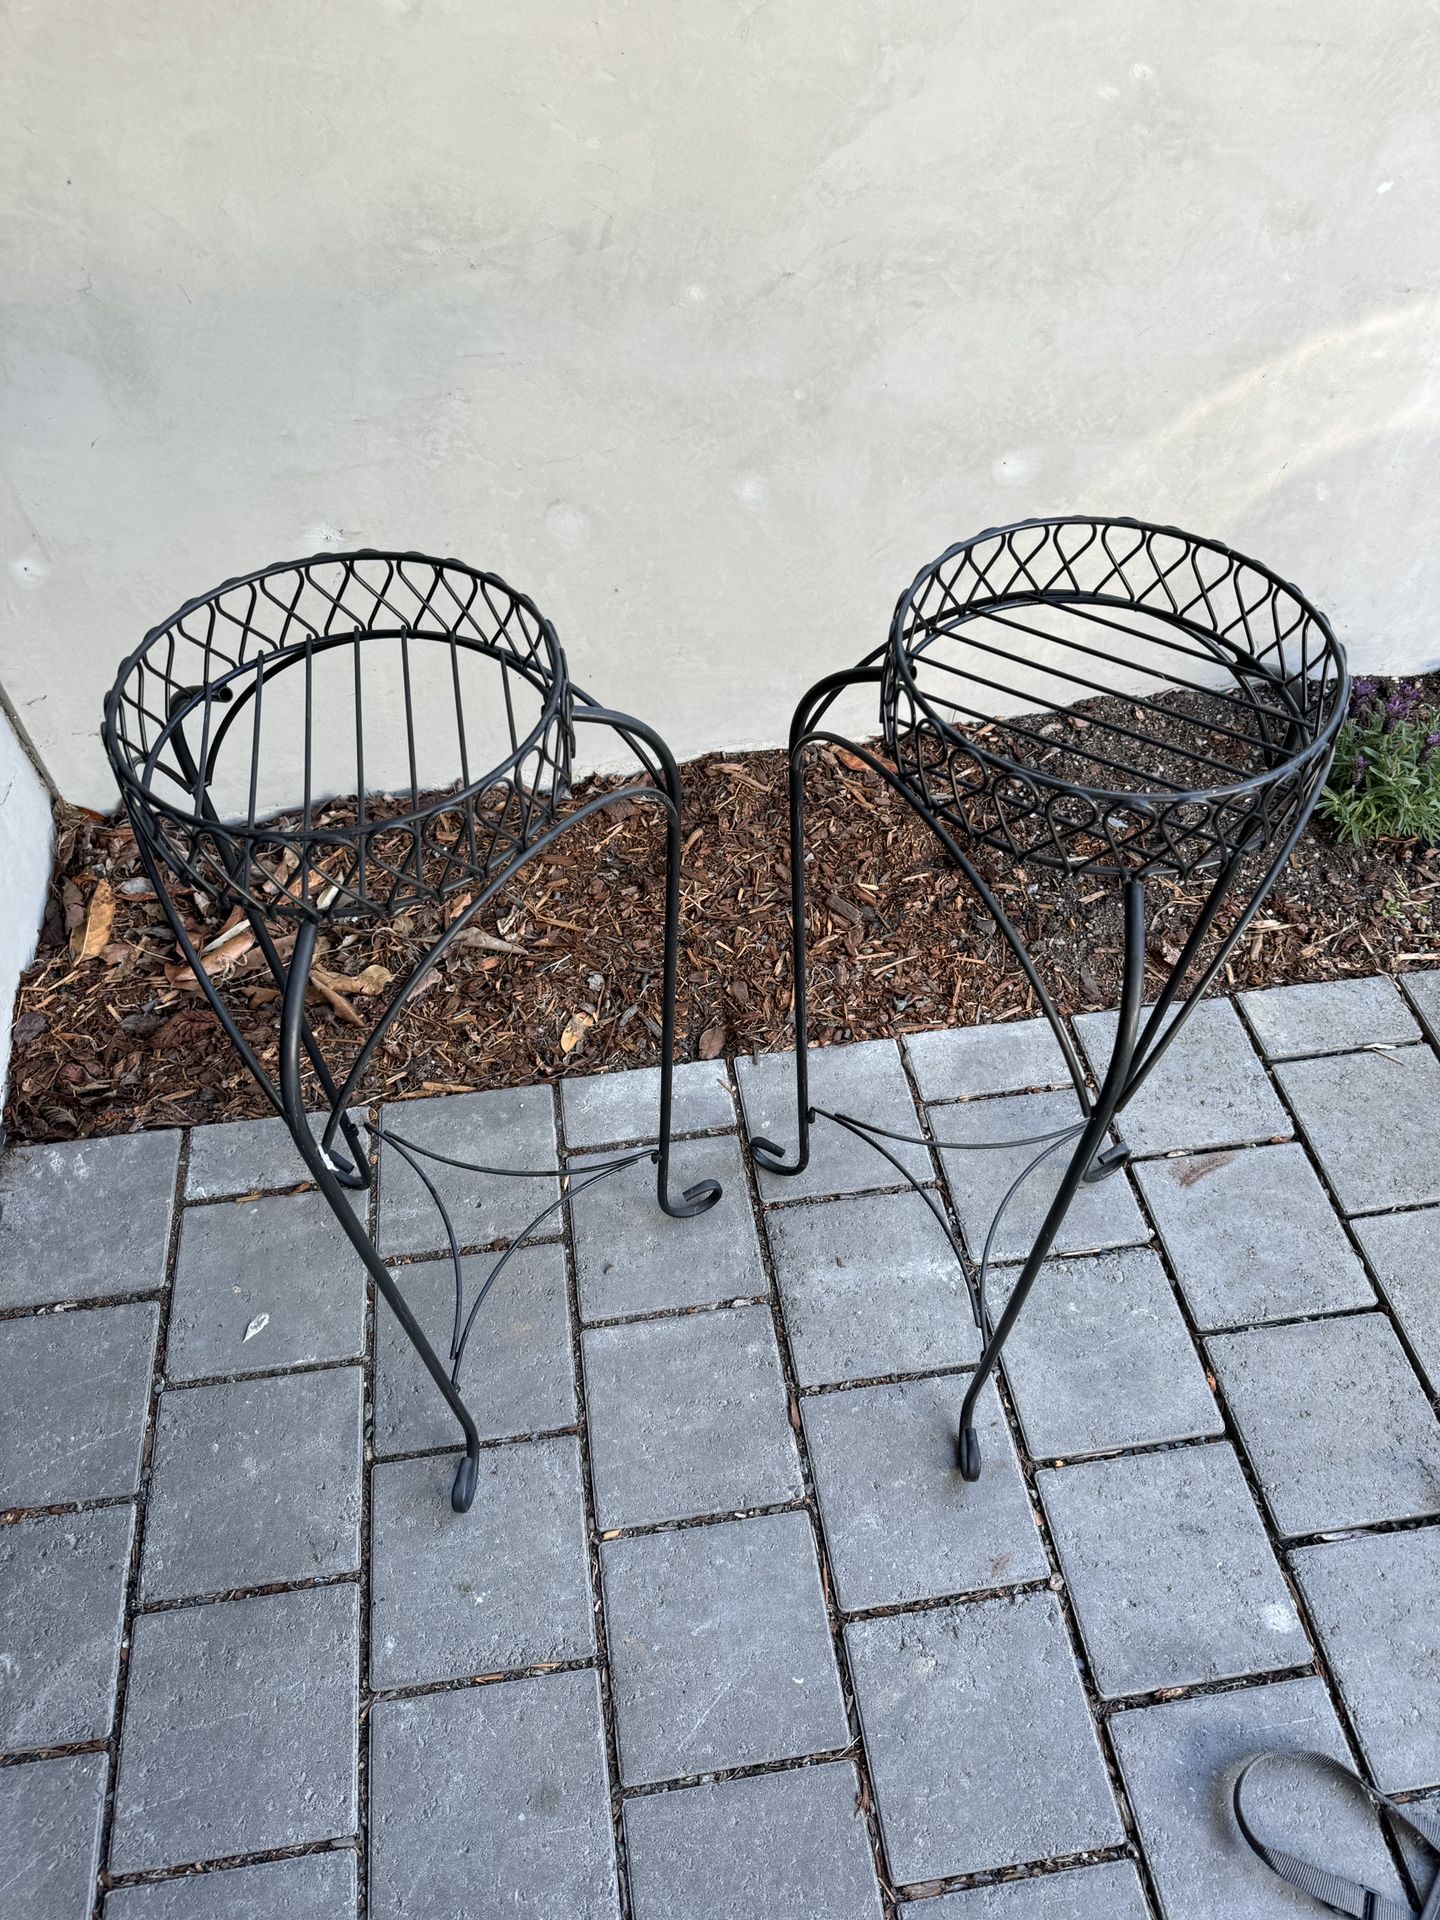 FREE: 2 Plant stands